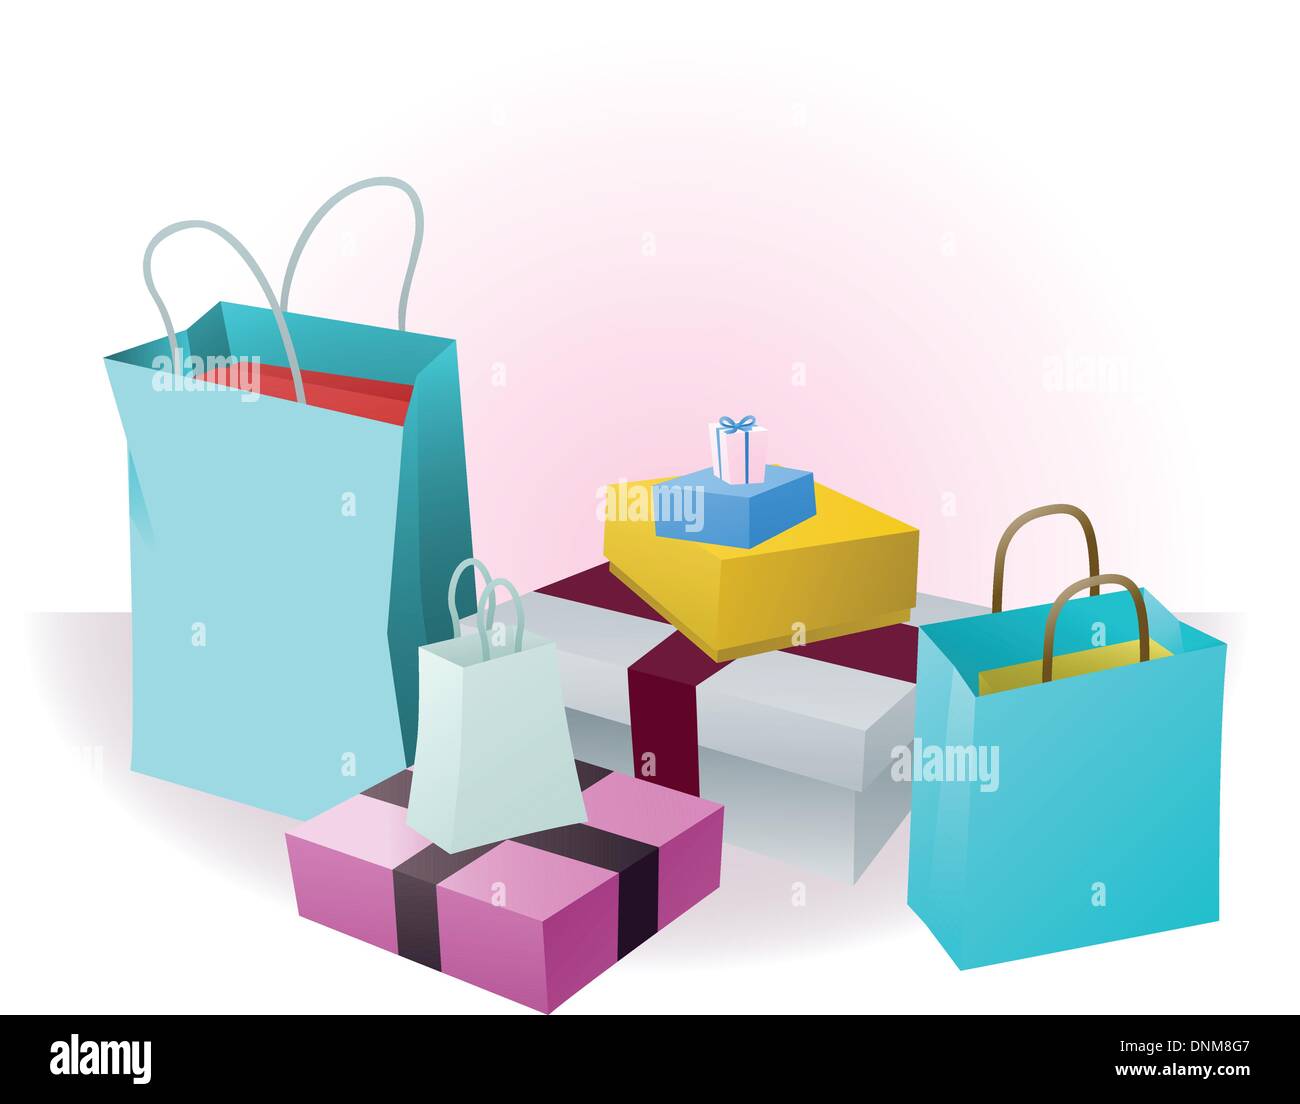 Stacks of luxury shopping purchases or gifts Stock Vector